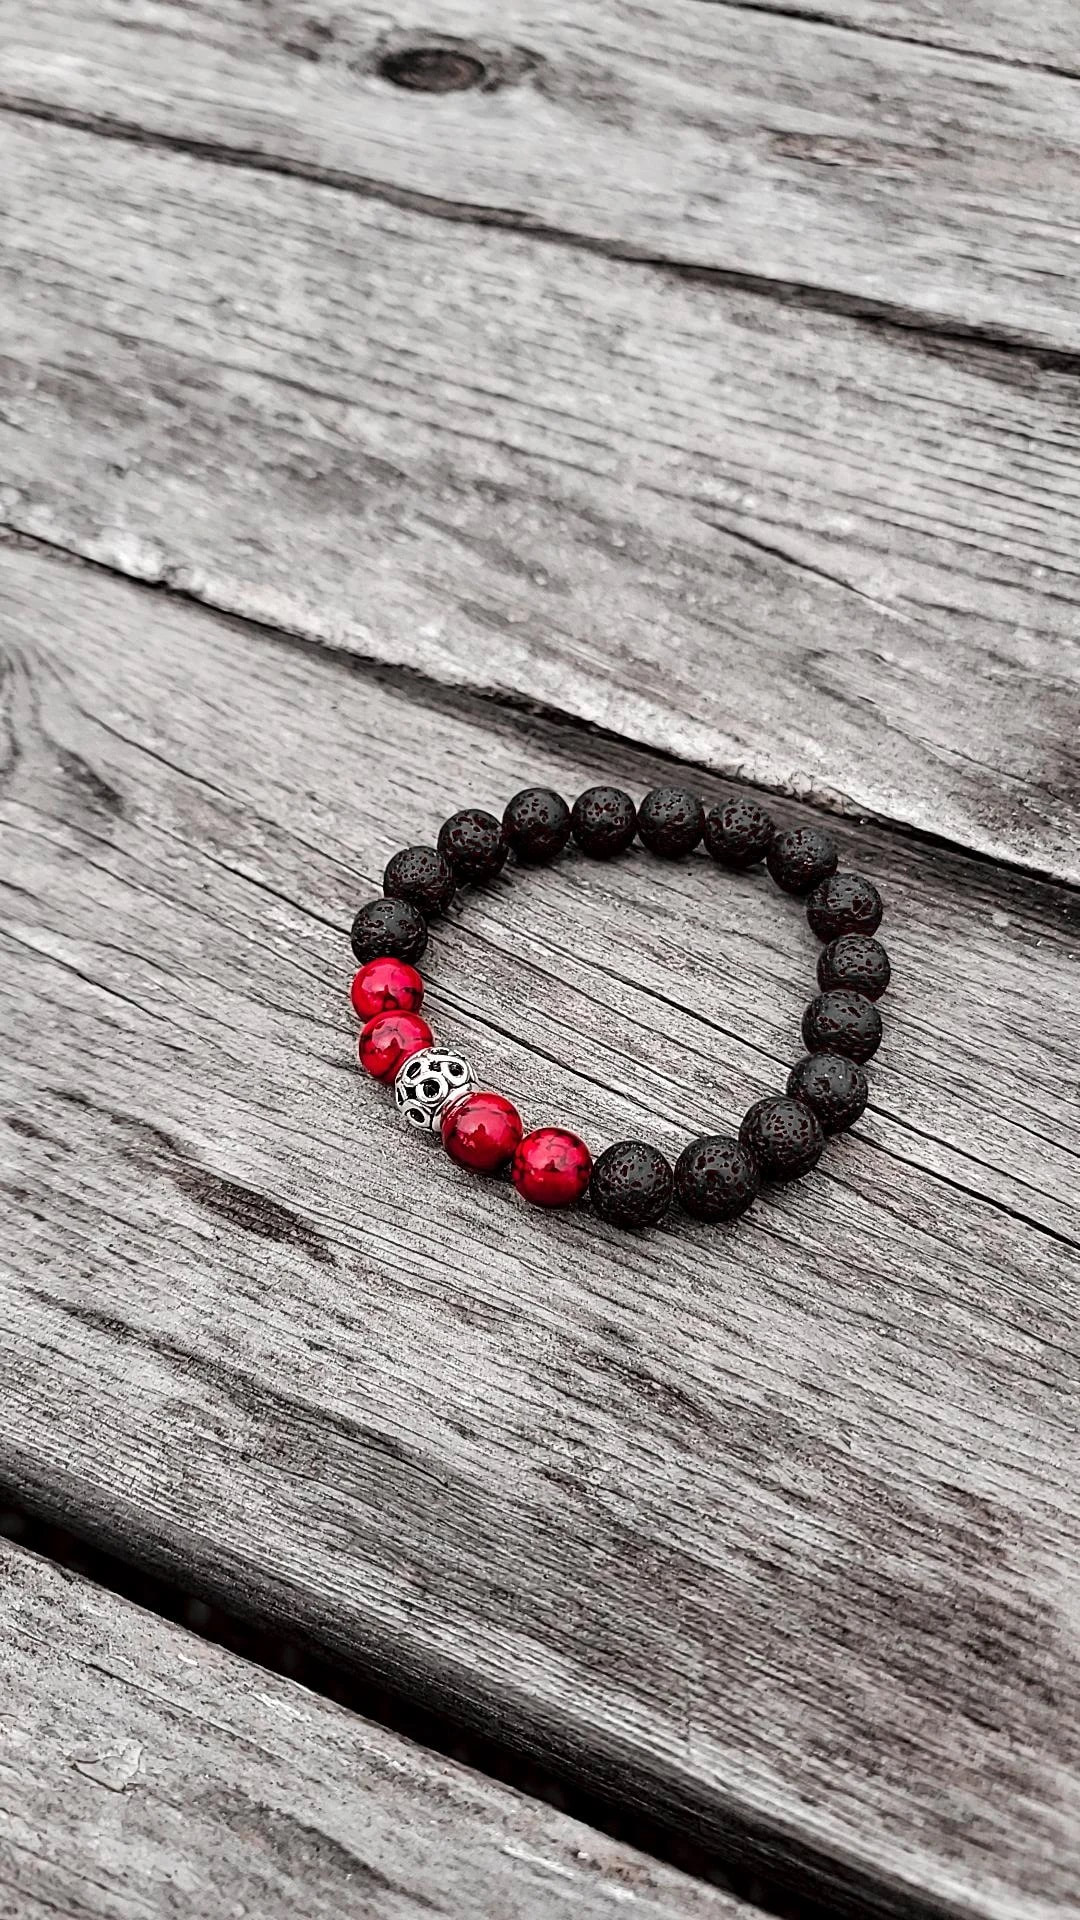 Brass N' Beads Red Cracked Beads & Lava Rock Bracelet / Size Large / Large Beads ( Ready to Ship / 7C )